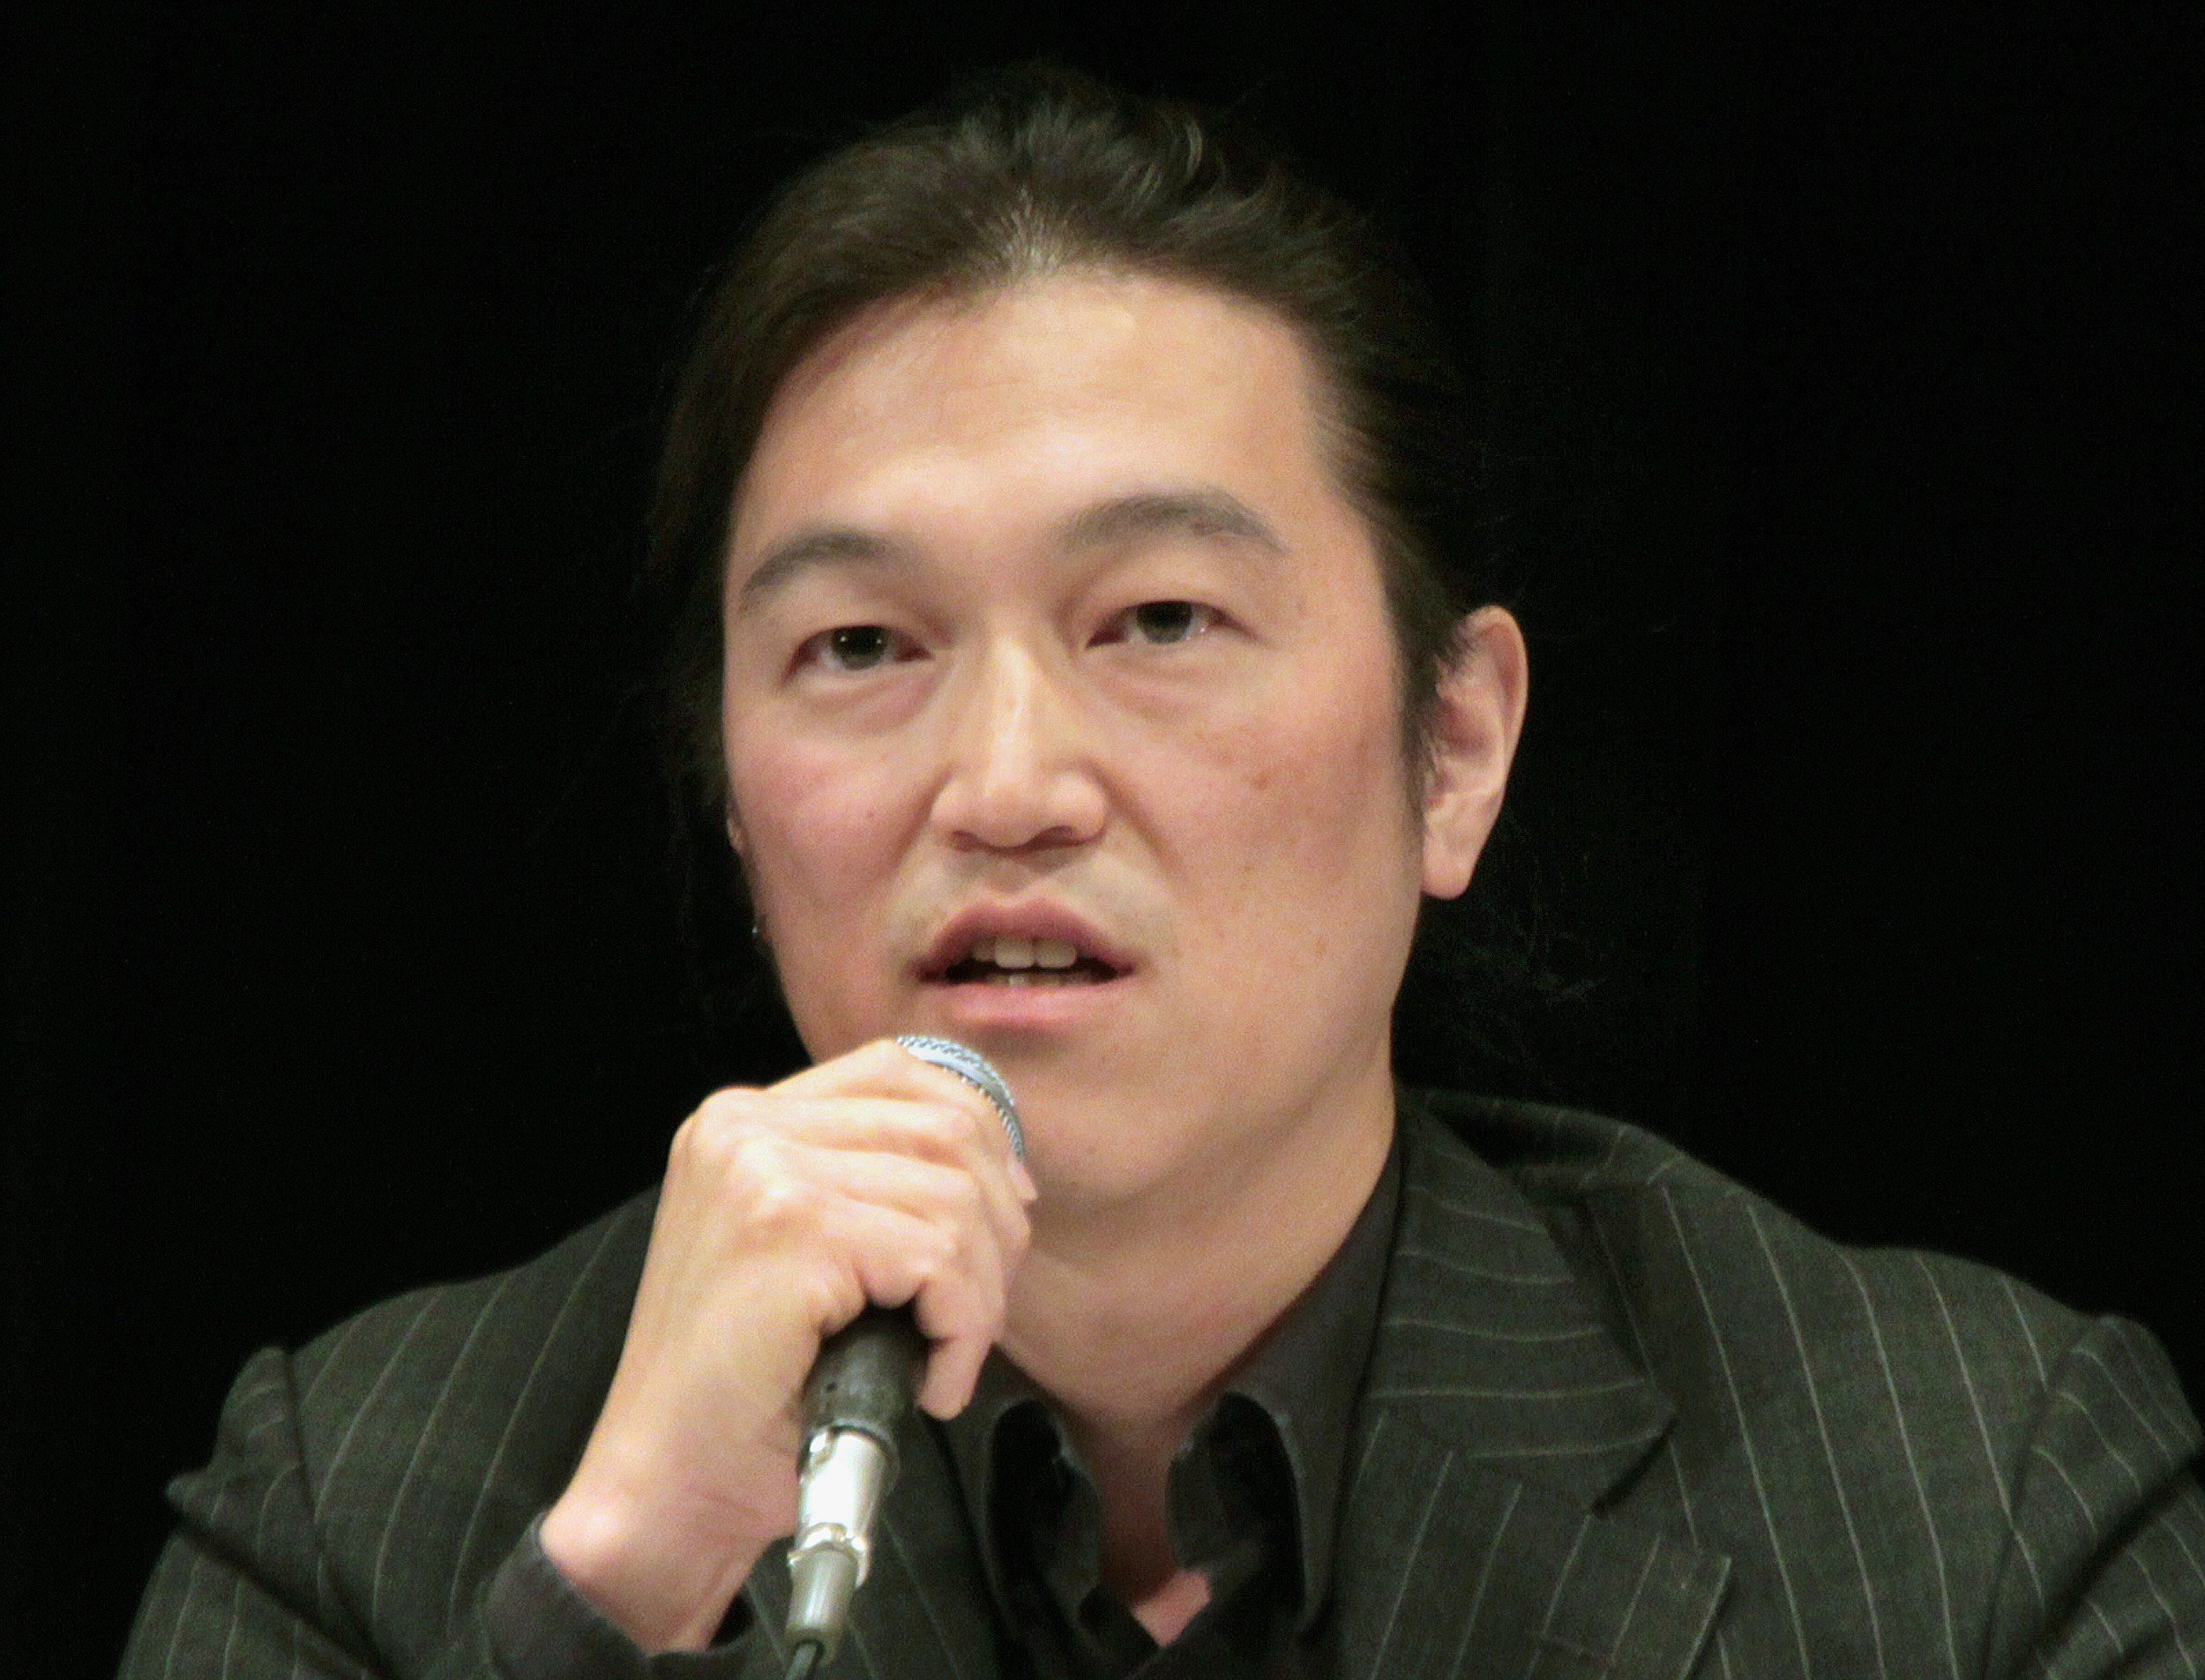 Japanese journalist Kenji Goto delivering a lecture during a symposium in Tokyo on Oct. 27, 2010. (Japan Commitee For The UNICEF/AFP/Getty Images)